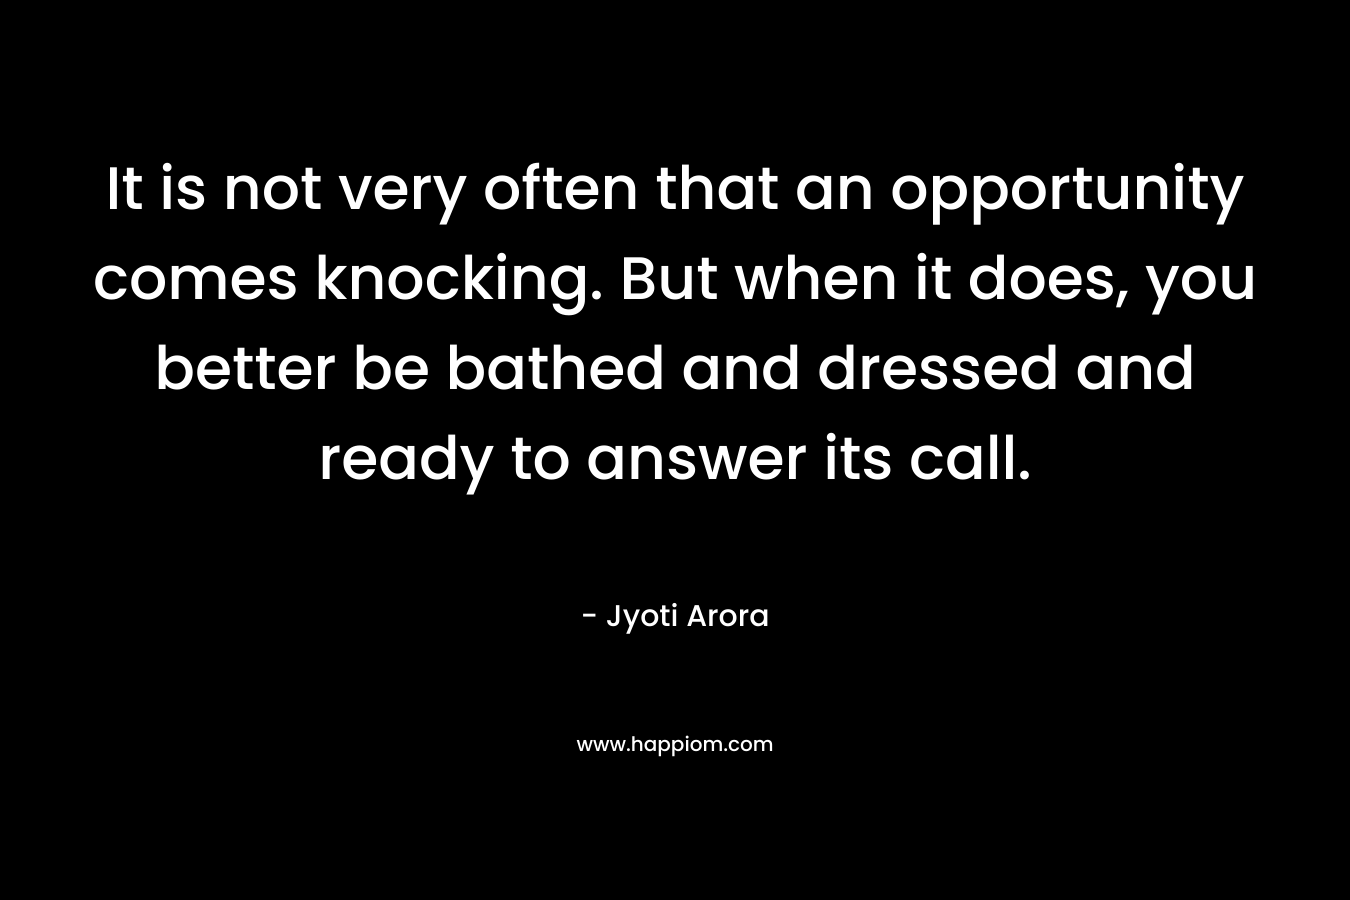 It is not very often that an opportunity comes knocking. But when it does, you better be bathed and dressed and ready to answer its call. – Jyoti Arora